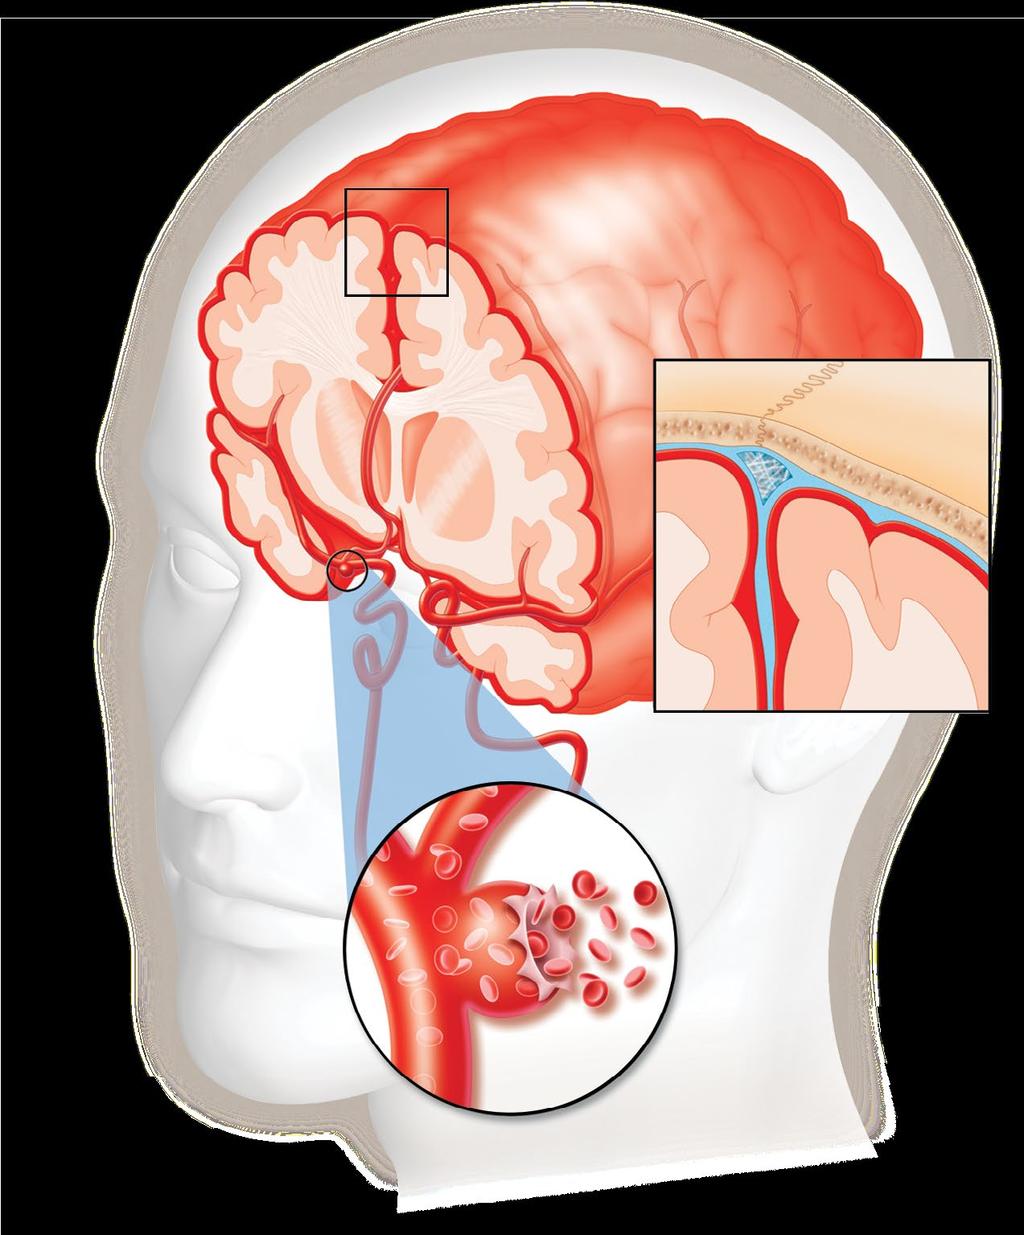 Subarachnoid Hemorrhage Subarachnoid Space Middle Cerebral Artery Saccular Aneurysm Subarachnoid Space (in Blue) Between Skull and Brain (enlarged view) Another kind of hemorrhagic stroke is called a